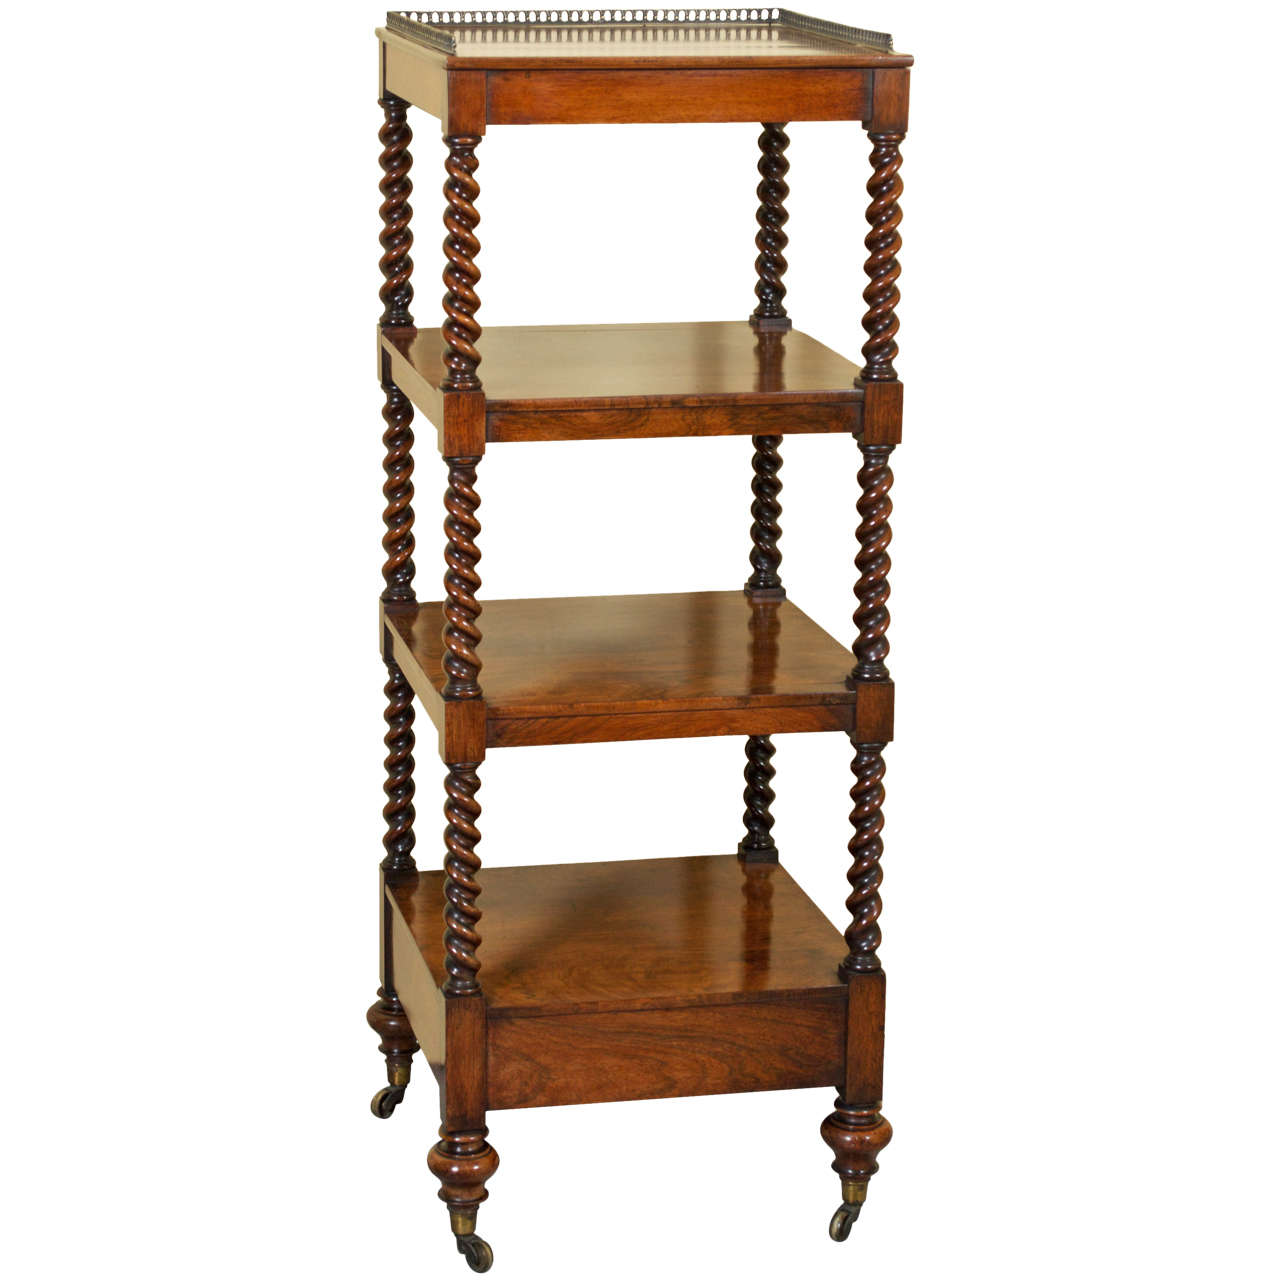 19th Century Victorian Rosewood Whatnot or Etagere